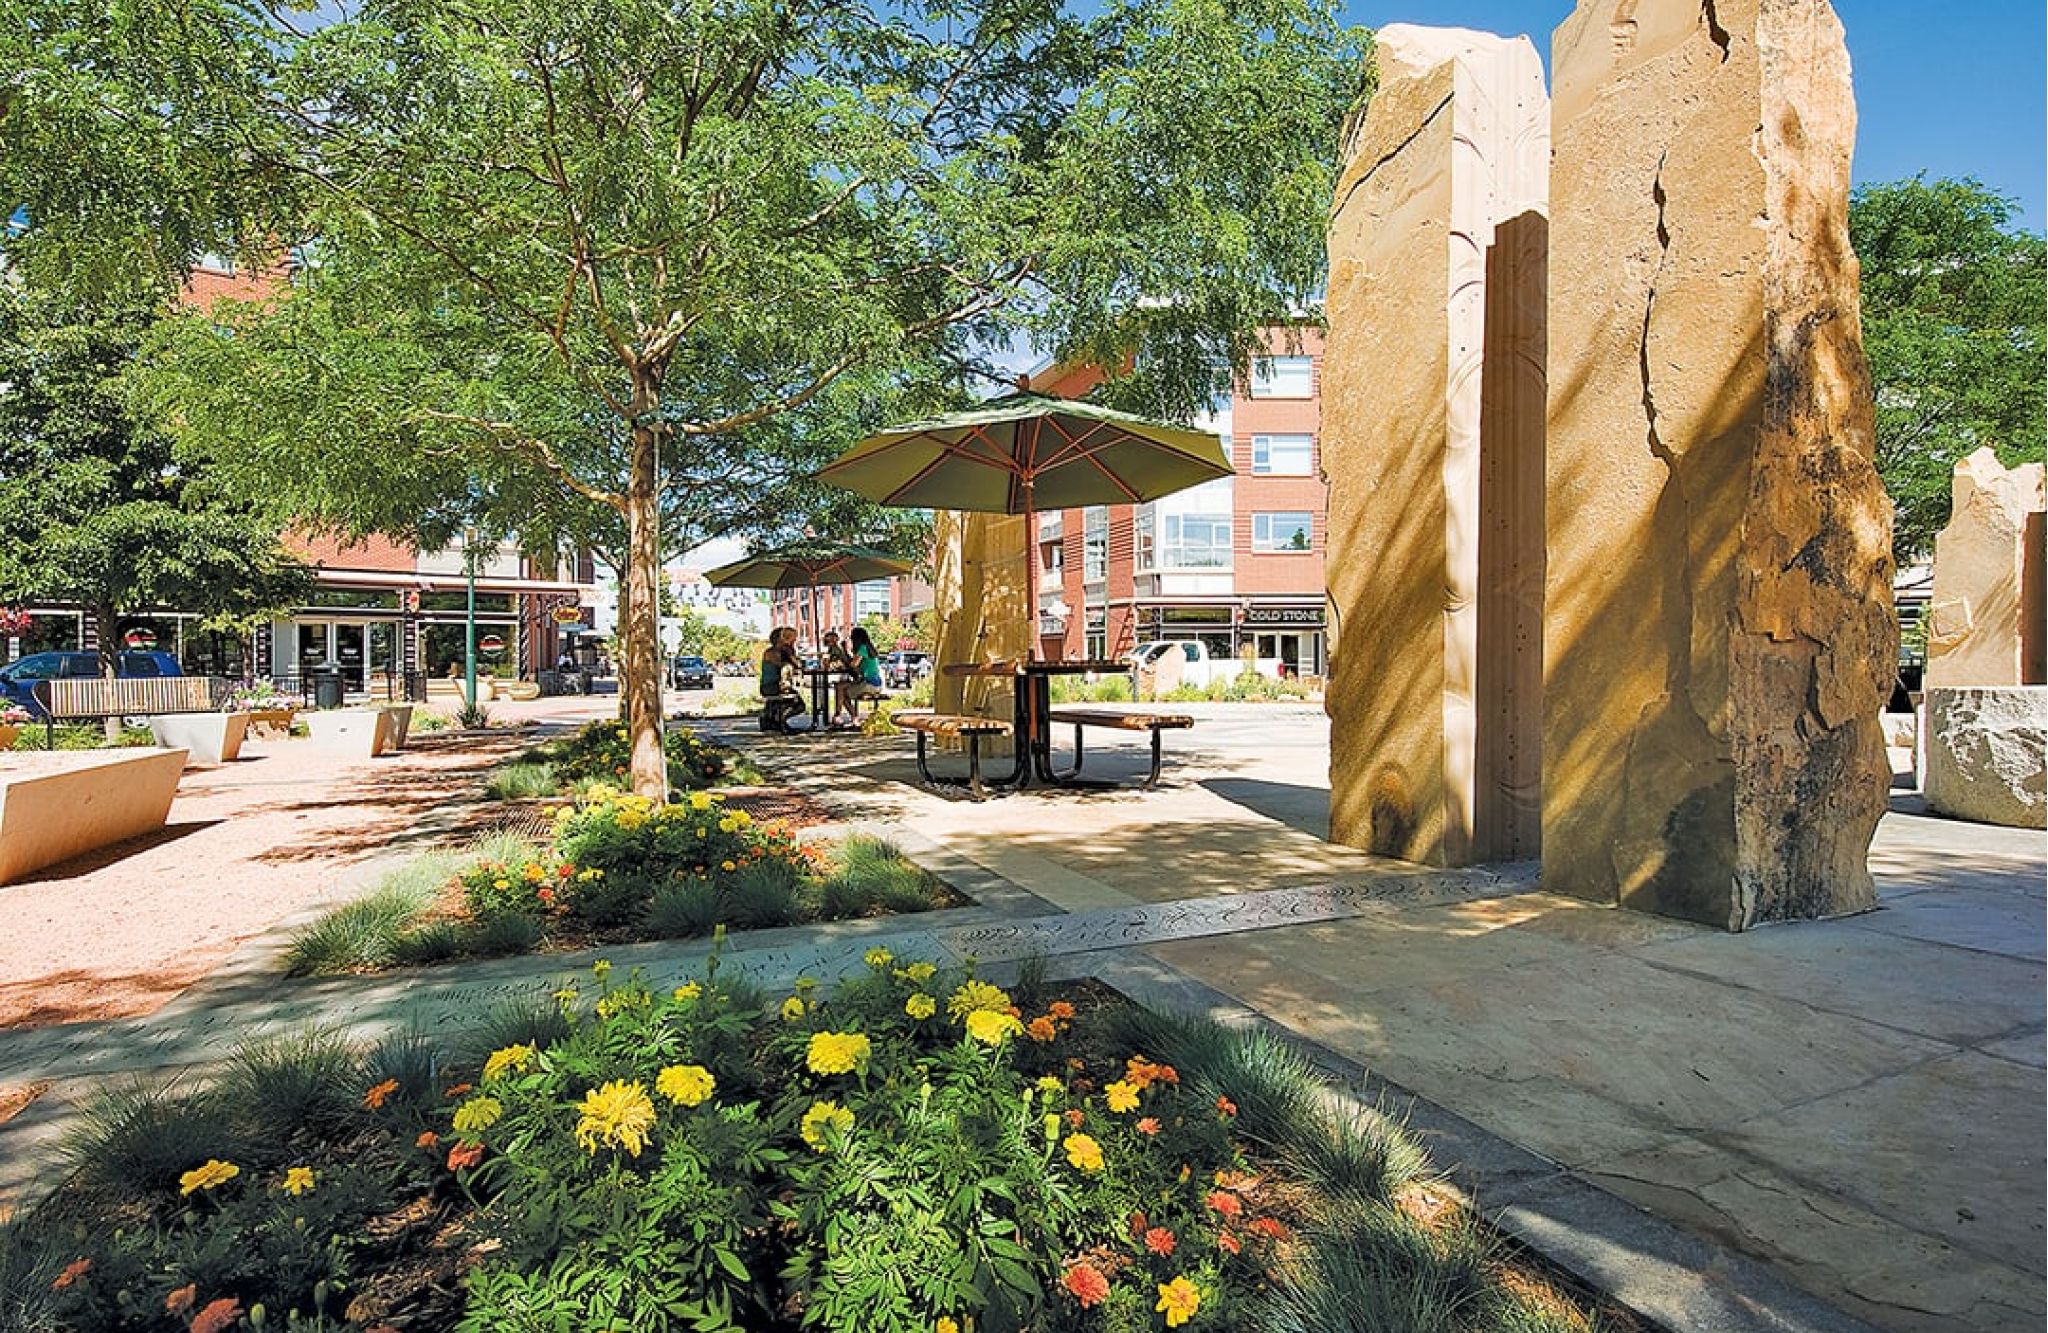 Beautiful outdoor seating area in public plaza with flowers and rock sculptures